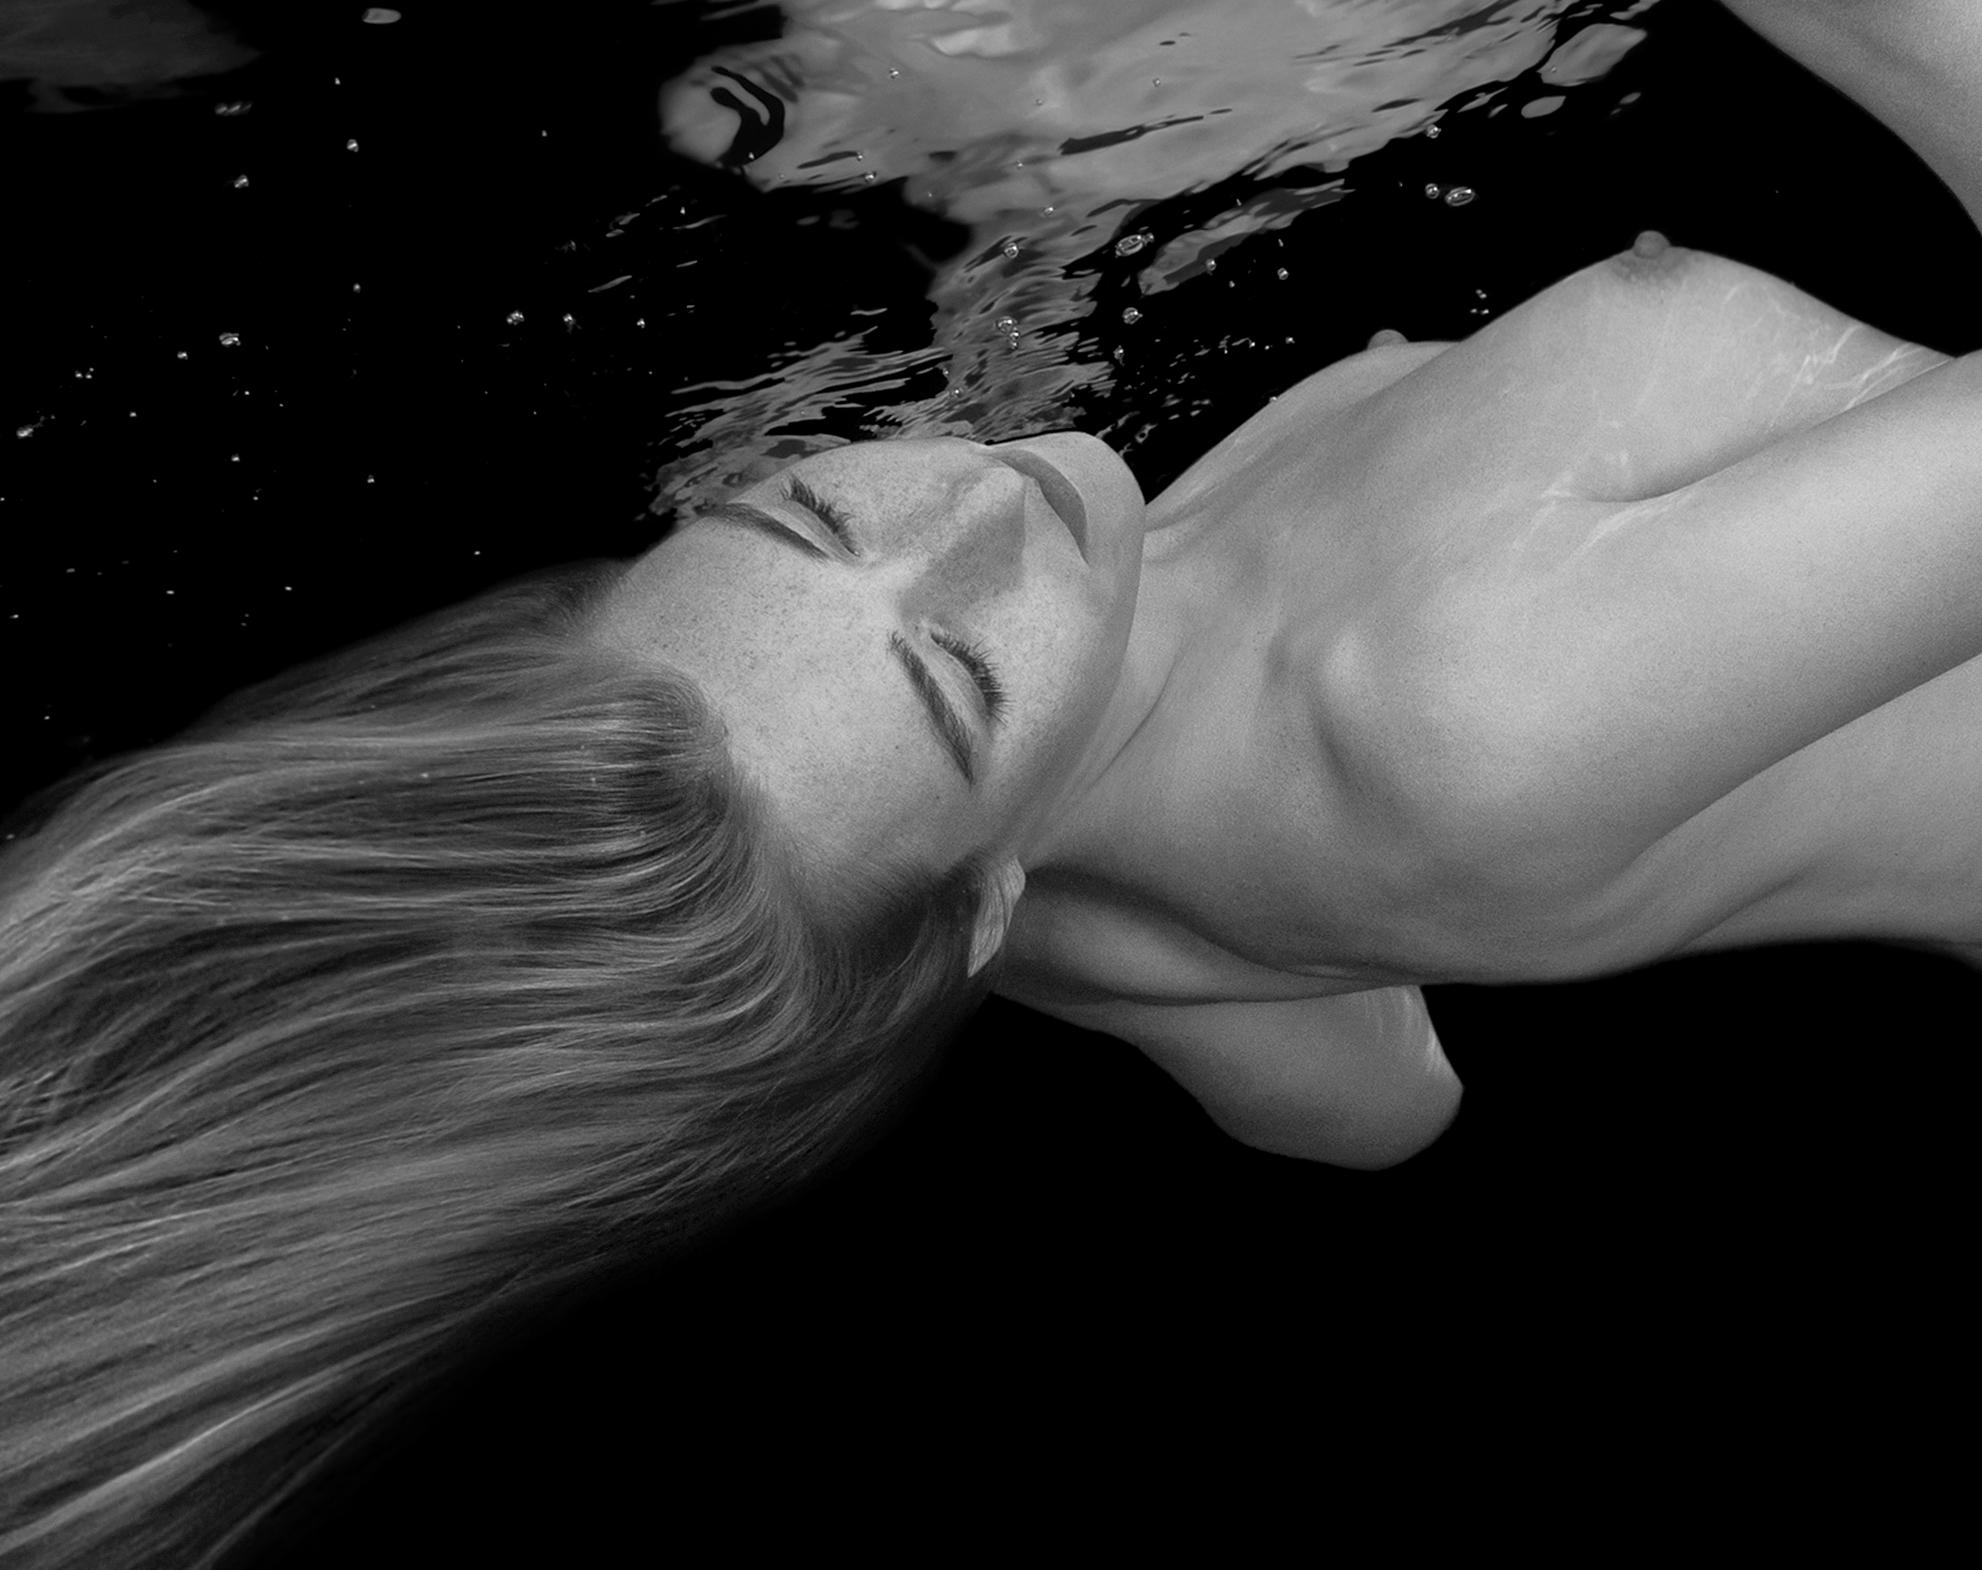 The Touch - underwater black & white nude photograph - archival pigment 35x52